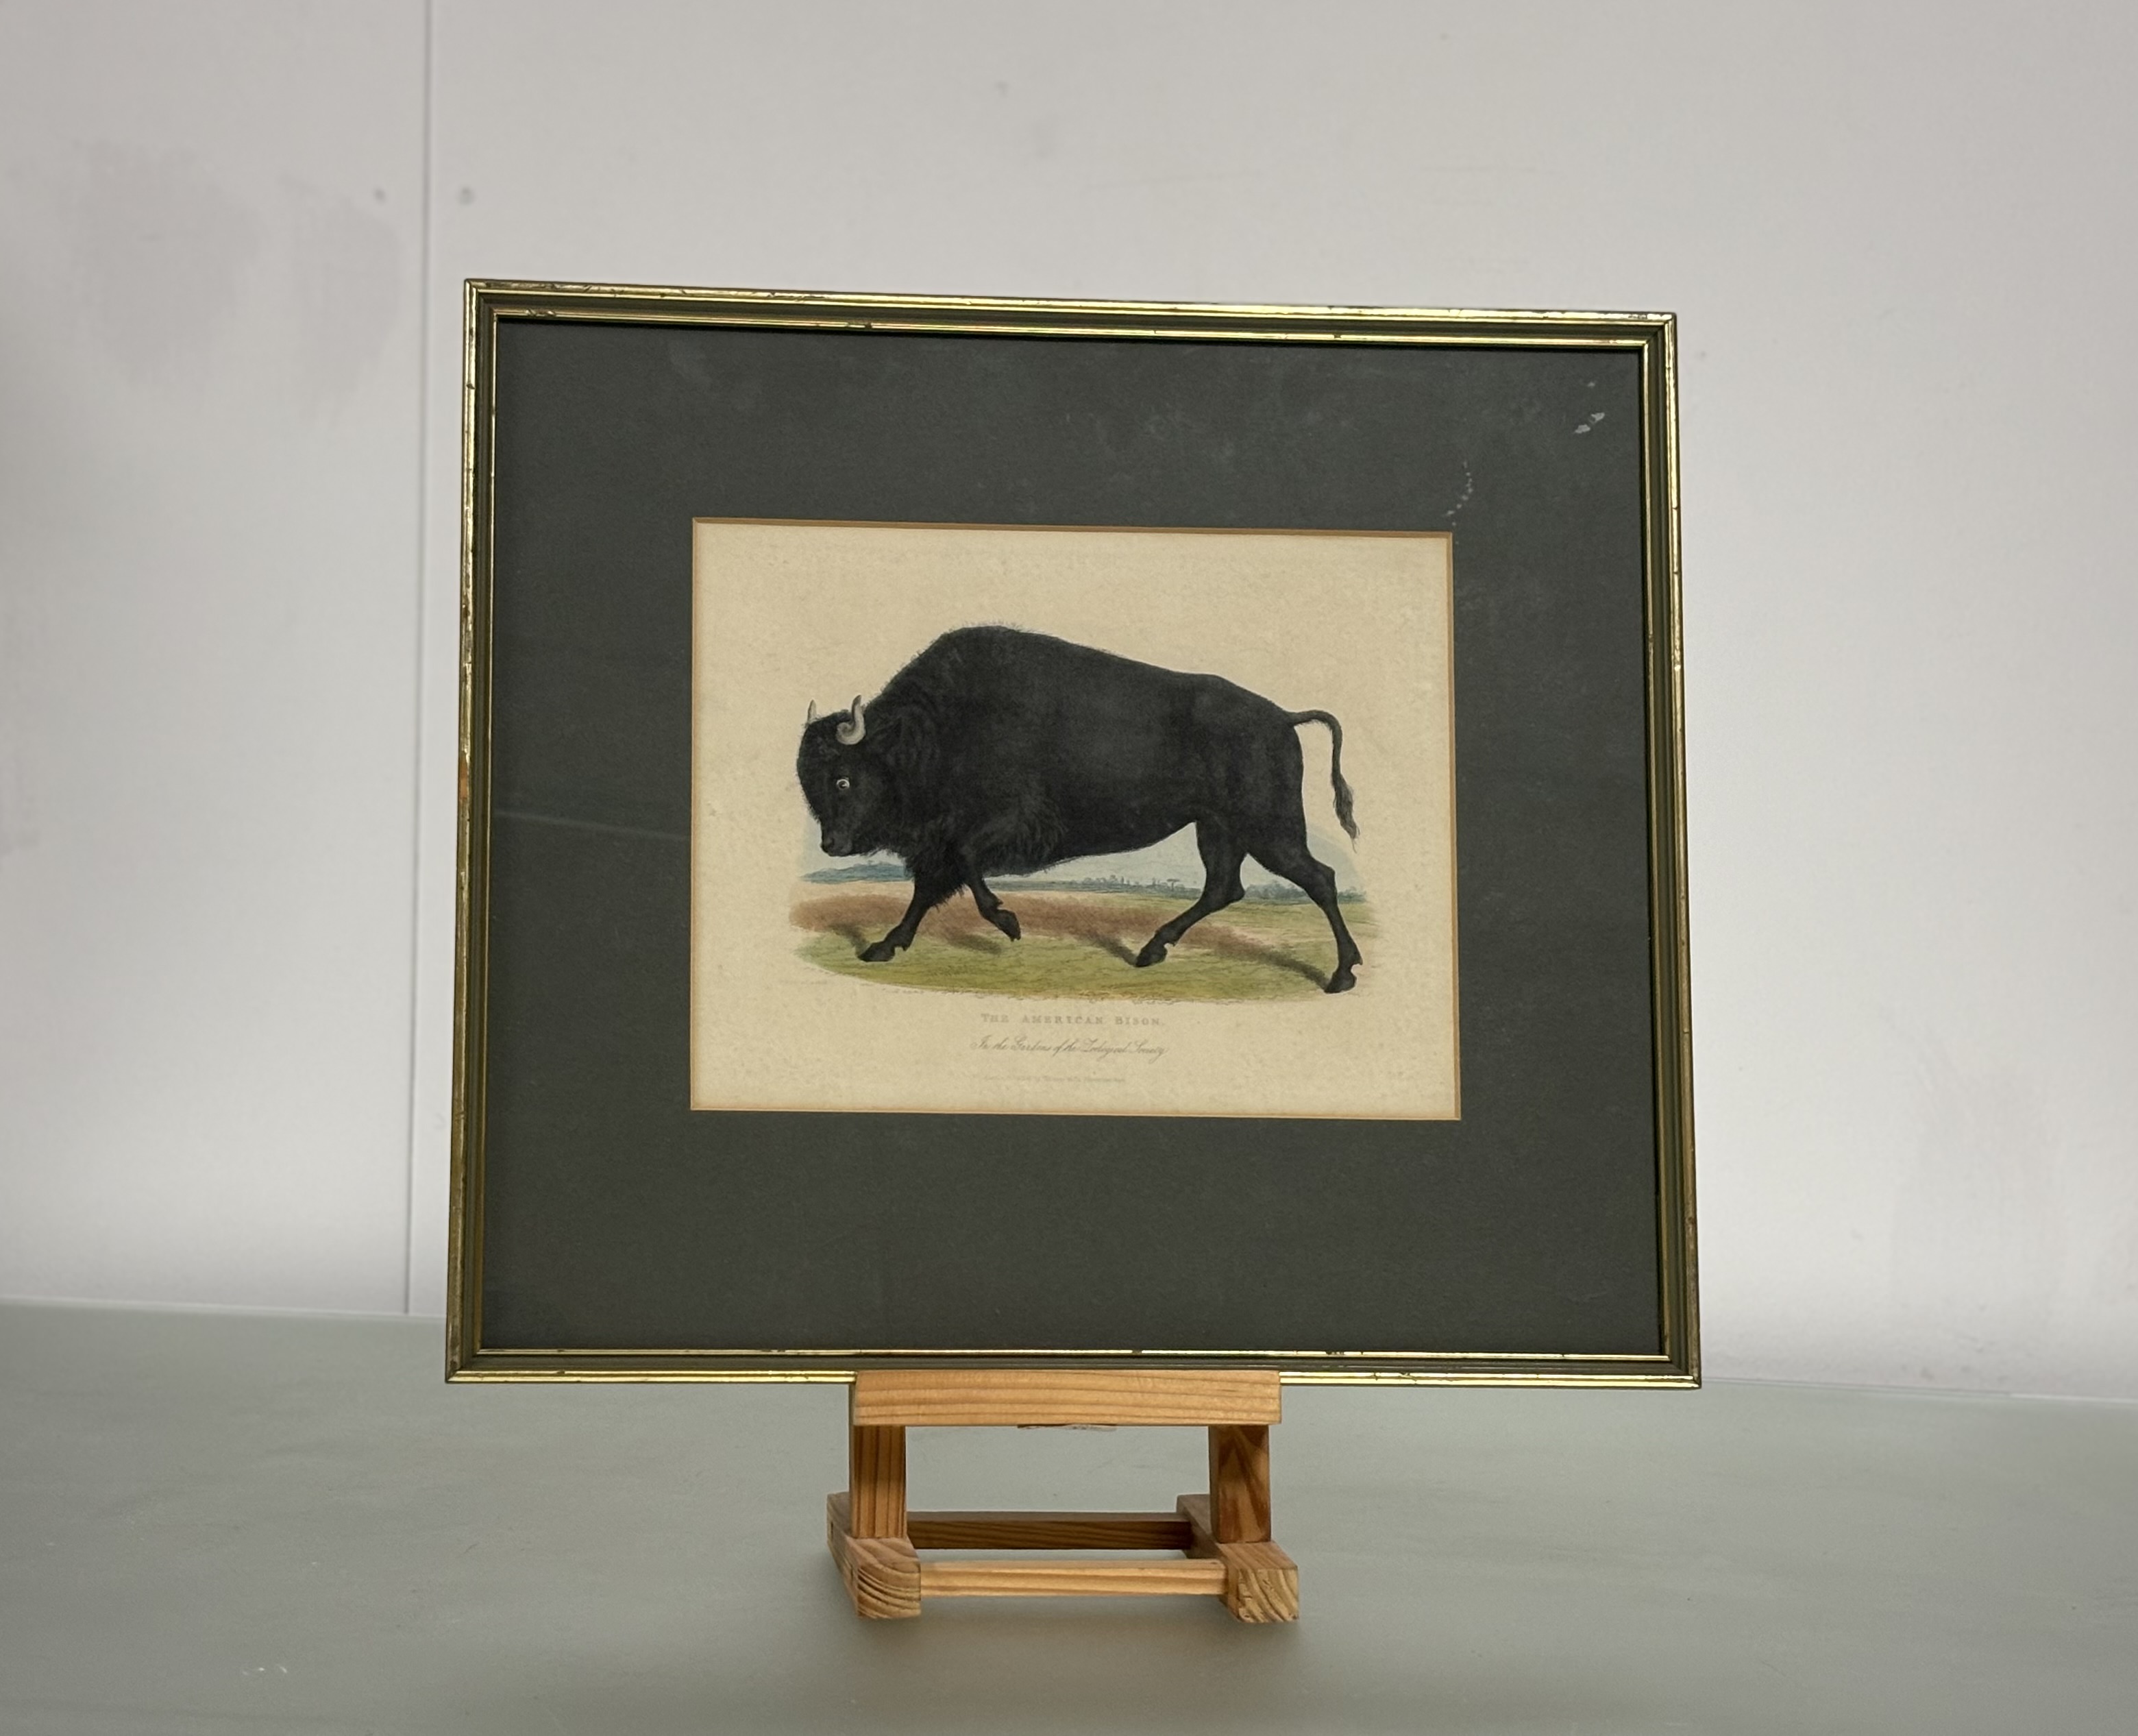 A set of nine Natural History coloured engravings of bison, bears and other mammals, c. 1820-30, - Image 7 of 10